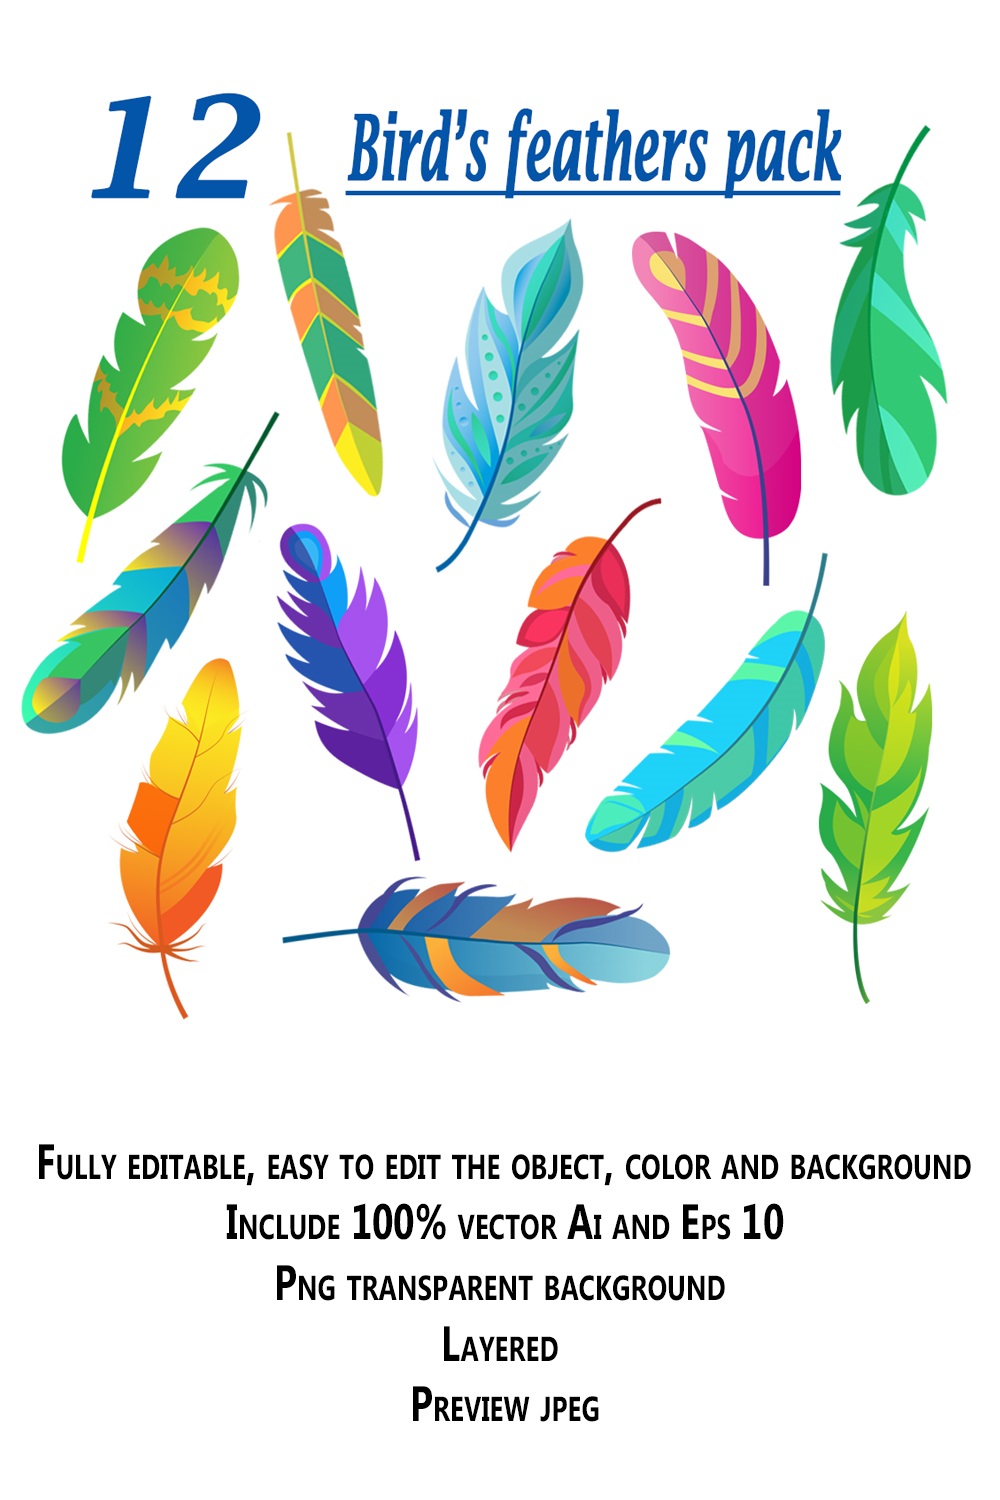 12 Colorful Bird's Feathers Flat Item Set pinterest preview image.